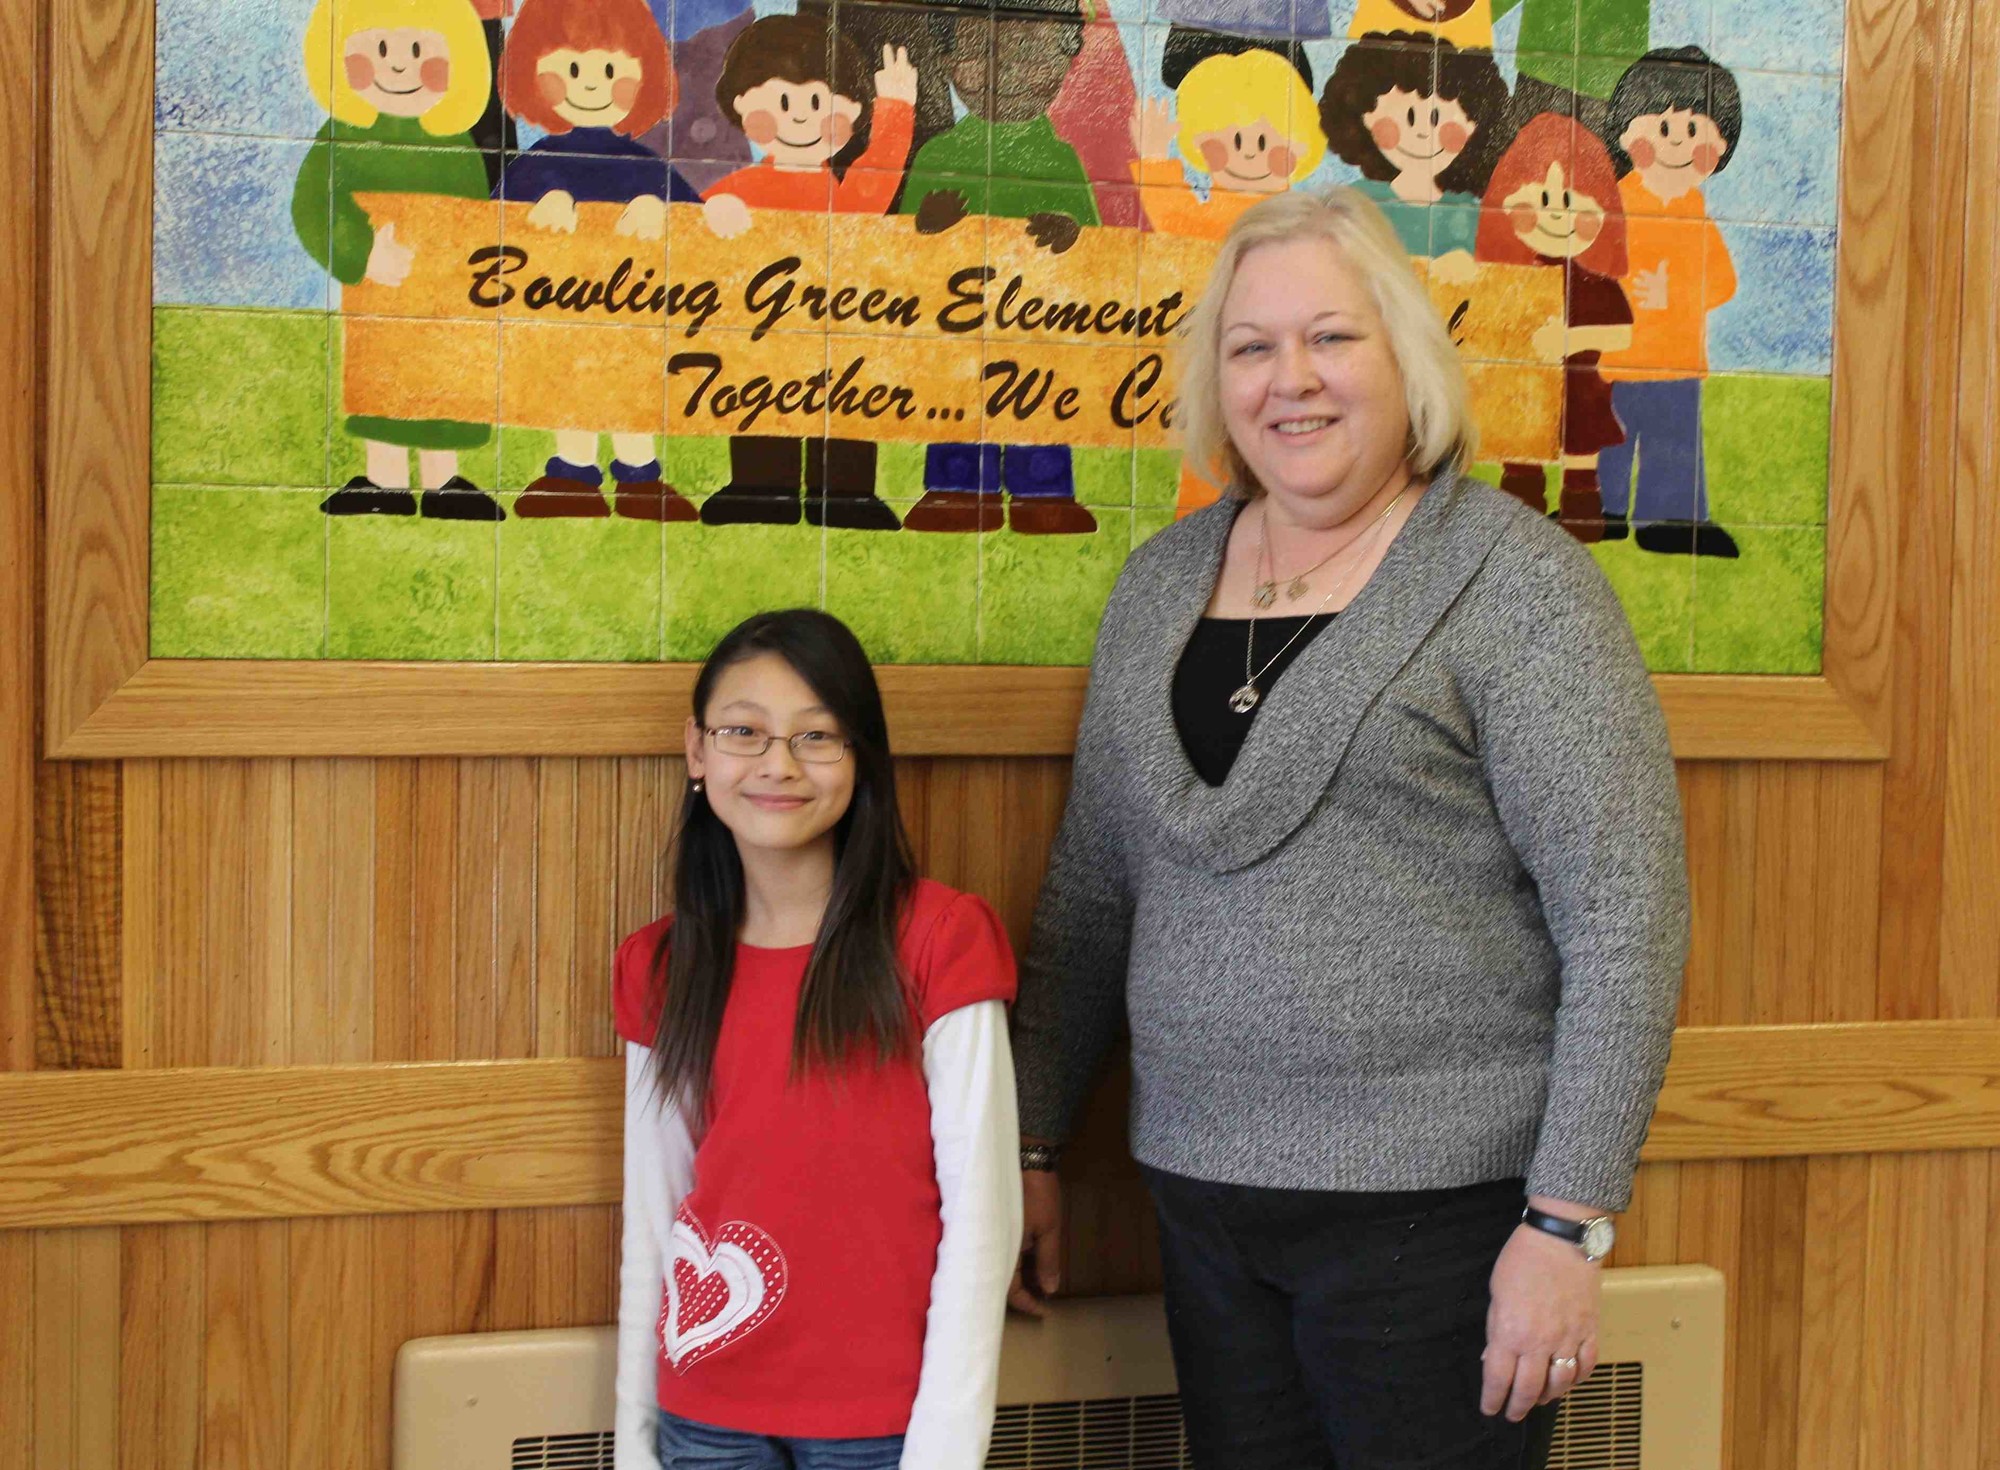 Yeonwoo Lee, with her Bowling Green Elementary School teacher Teresa Fjellstad, was a recent winner in the Town of Hempstead’s 2015 Recycle Poster Contest. Her artwork will be used to promote recycling townwide.